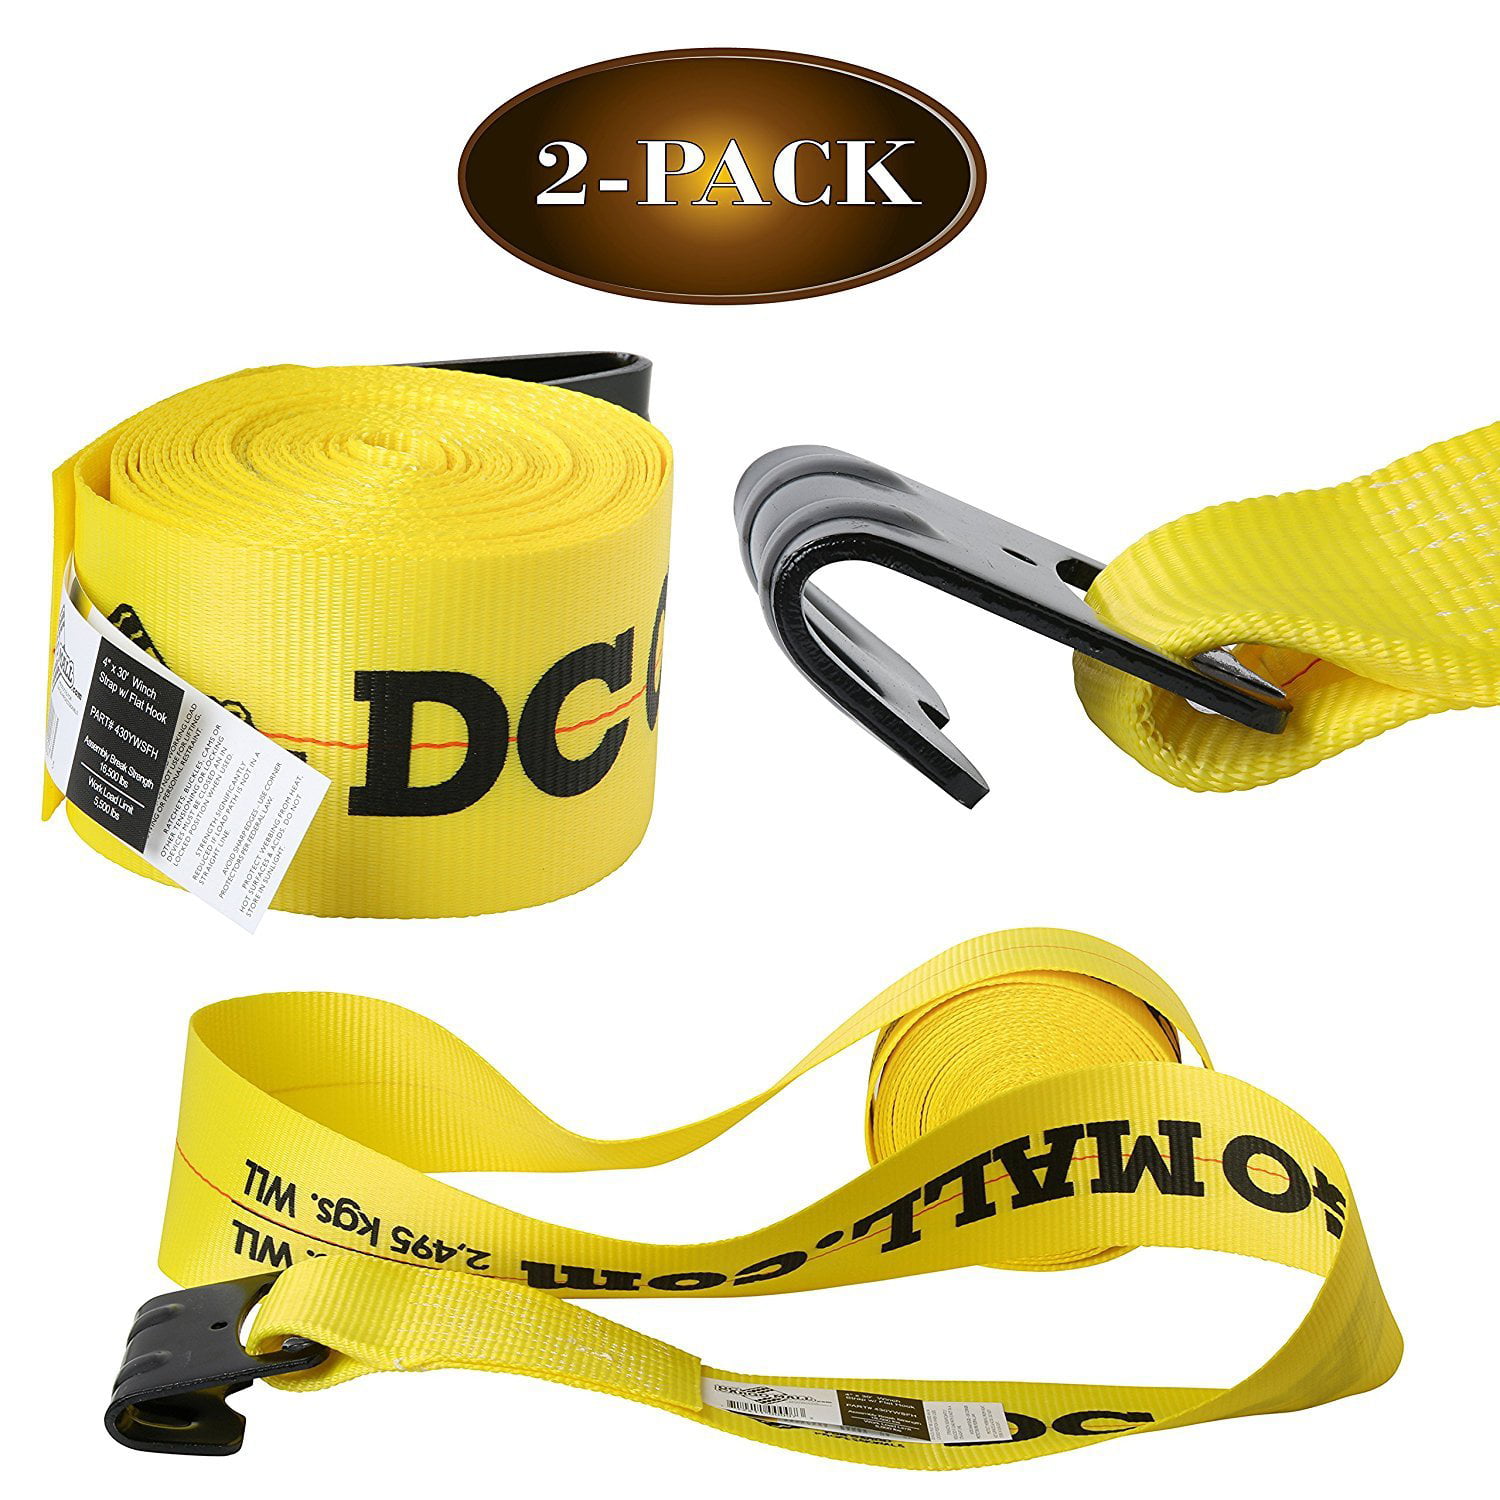 Mega Cargo Control Truck Winch Tie Down Strap w/ Chain Extension 3 x 30 Trailer Flatbed Truck 1-Pack Polyester Tie Down Color: Yellow WLL: 5000 lbs. 